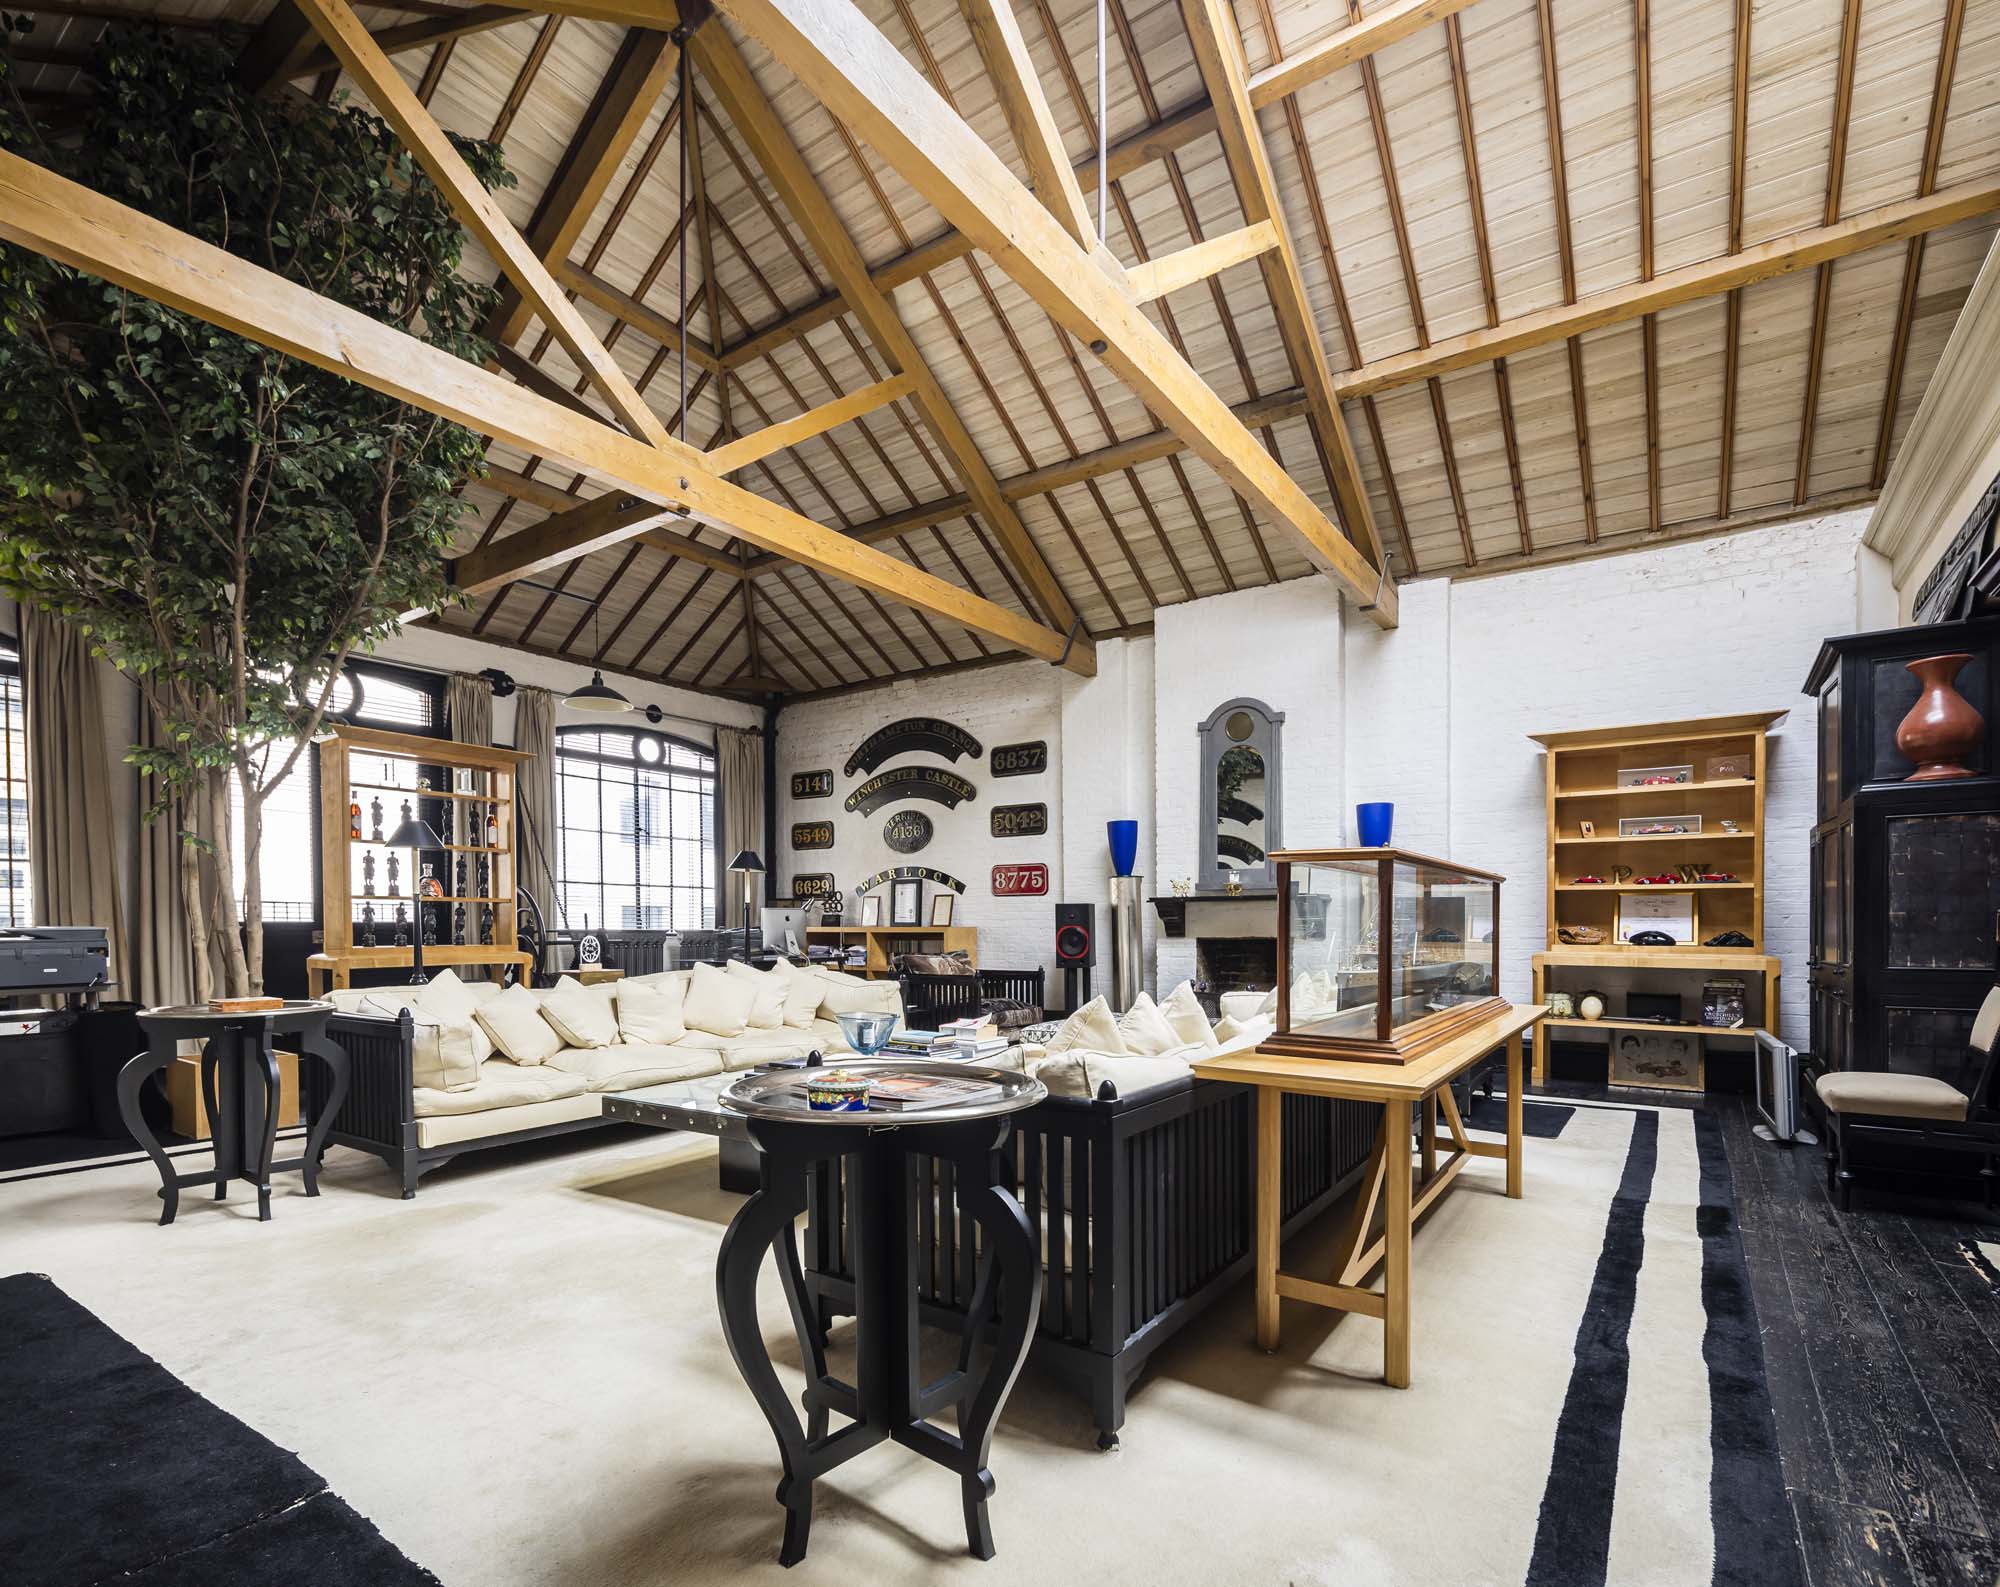 Penthouse above historic ‘Hit Factory’ studios listed for £1.35 million